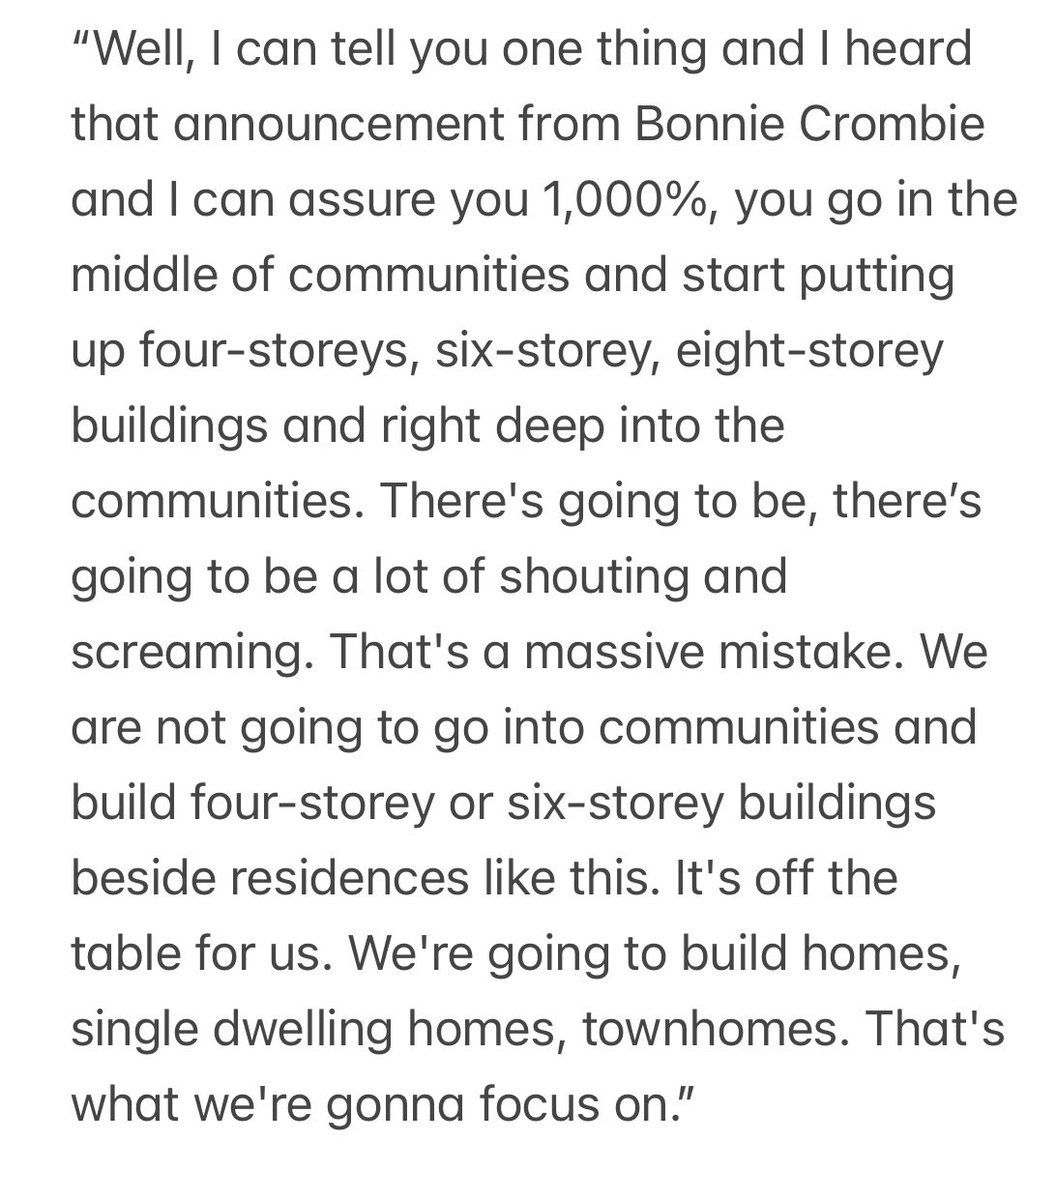 New: At today’s presser, Premier Doug Ford ruled out fourplexes provincewide, saying putting them in the middle of communities is “a massive mistake.” “It's off the table for us. We're going to build homes, single dwelling homes, townhomes.” Premier’s full response to my Q: